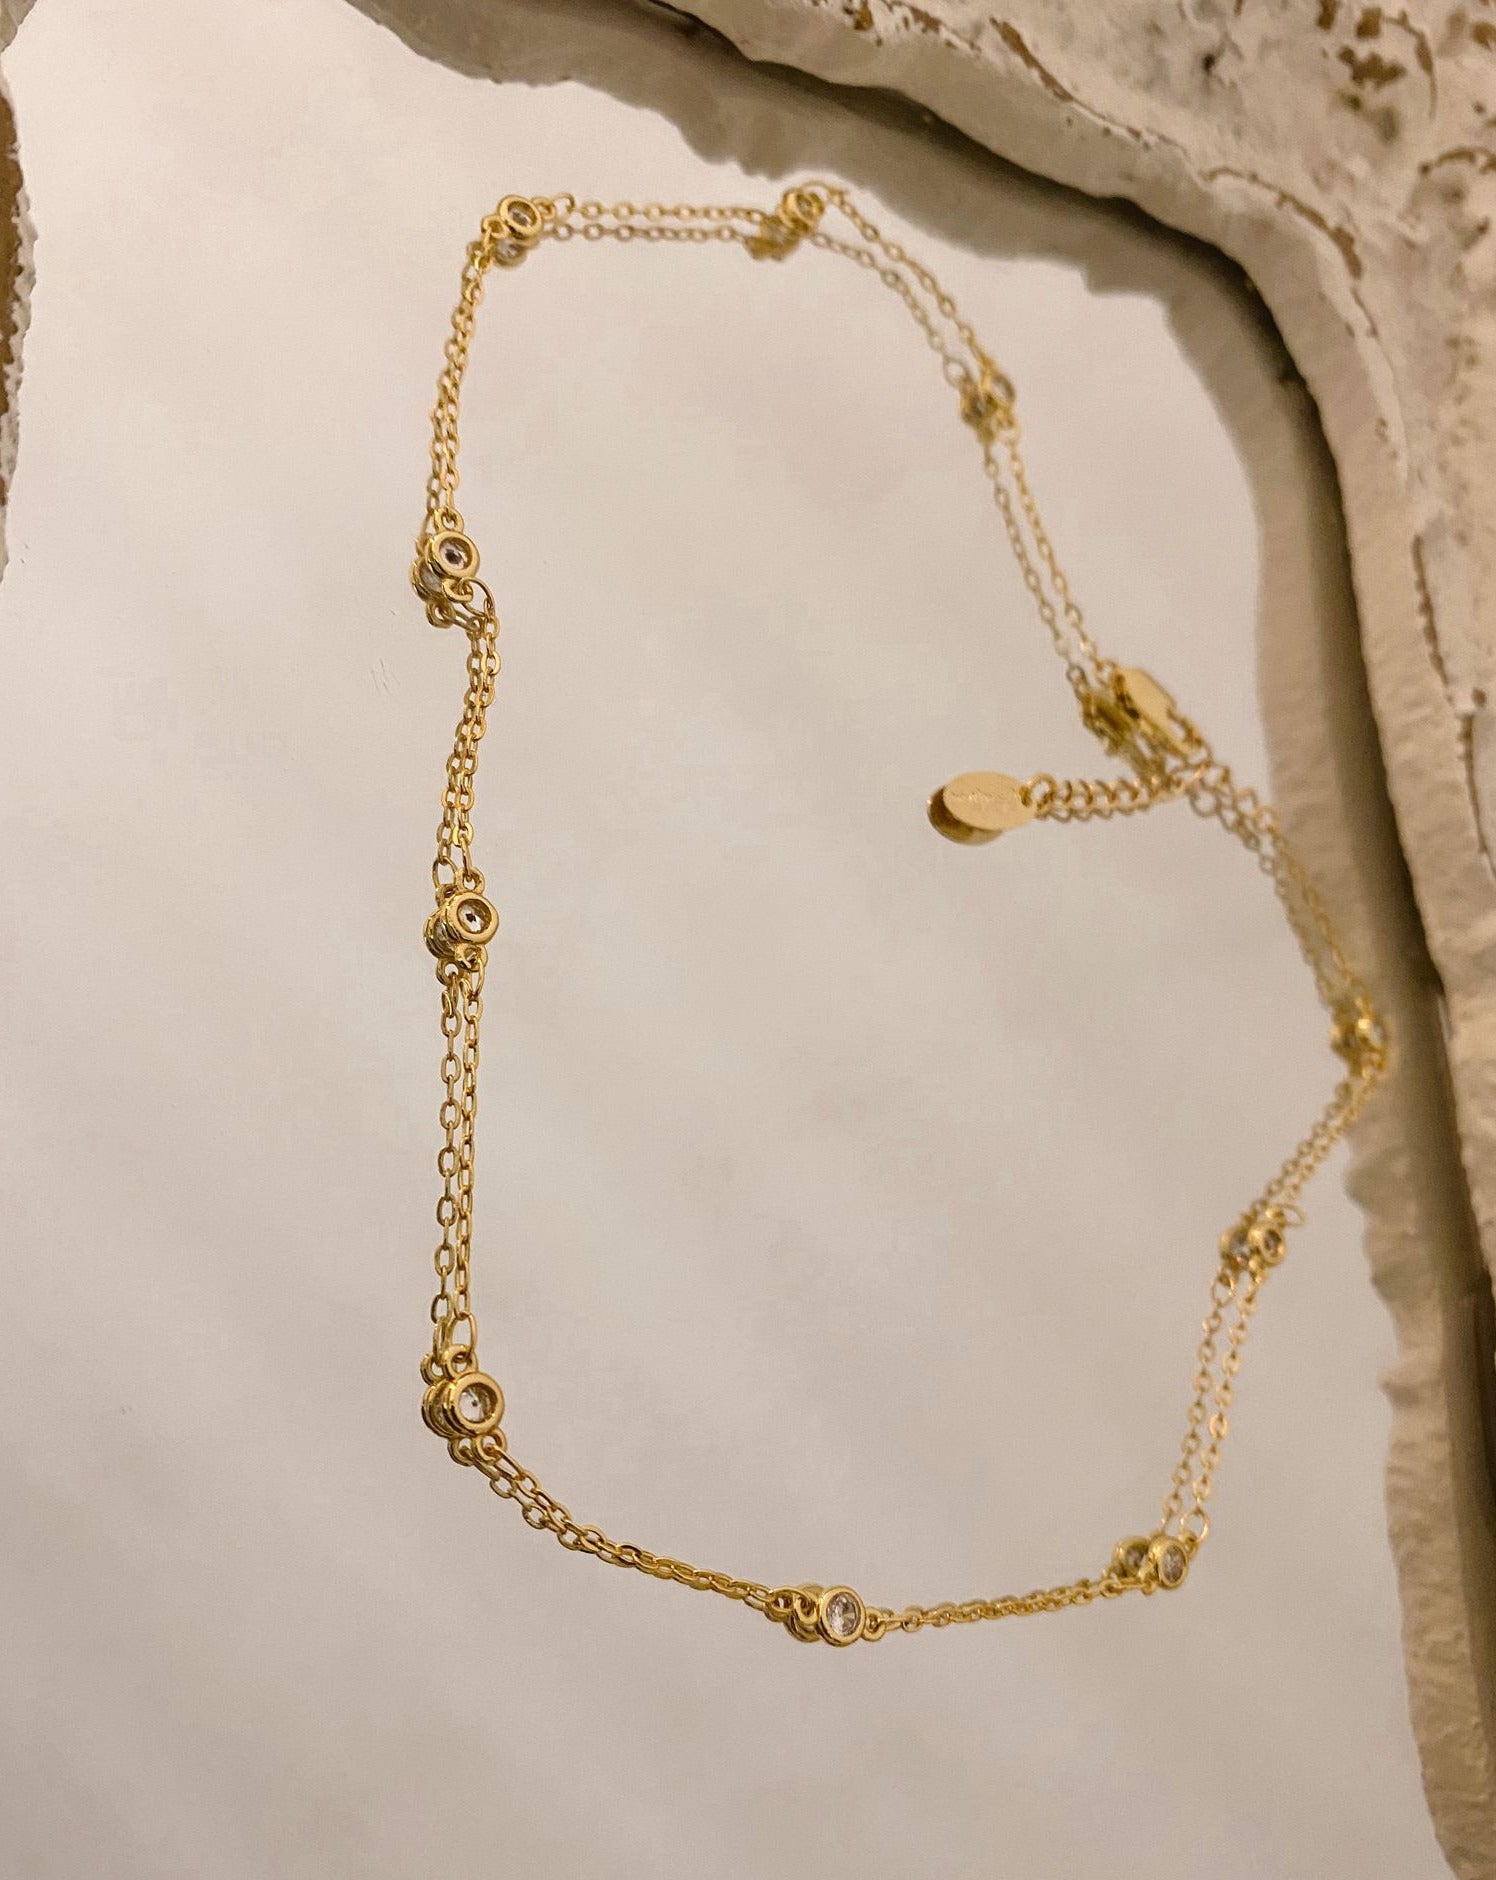 Gold Filled Chain with Shiny details